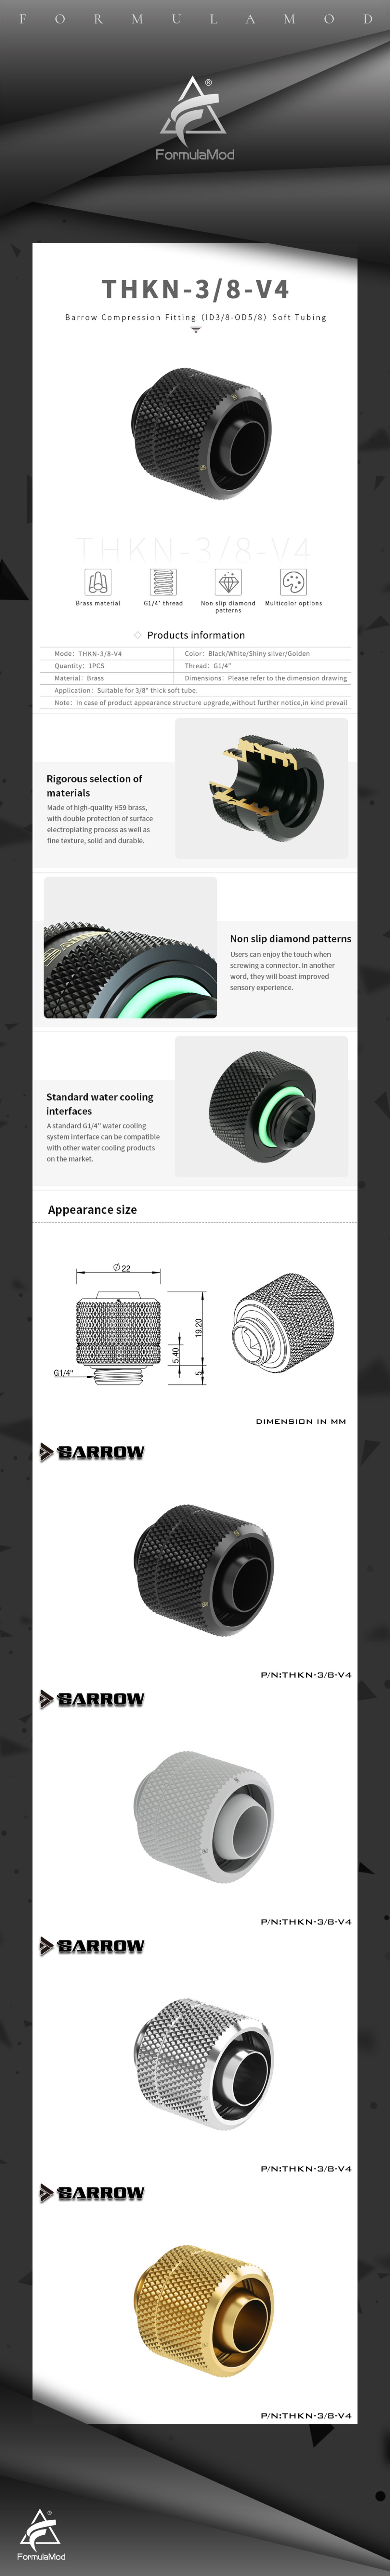 Barrow 10x16mm Soft Tube Fittings, 3/8"ID*5/8"OD G1/4" Fittings For Soft Tubes Extend Connector For Computer Case THKN-3/8-V4  